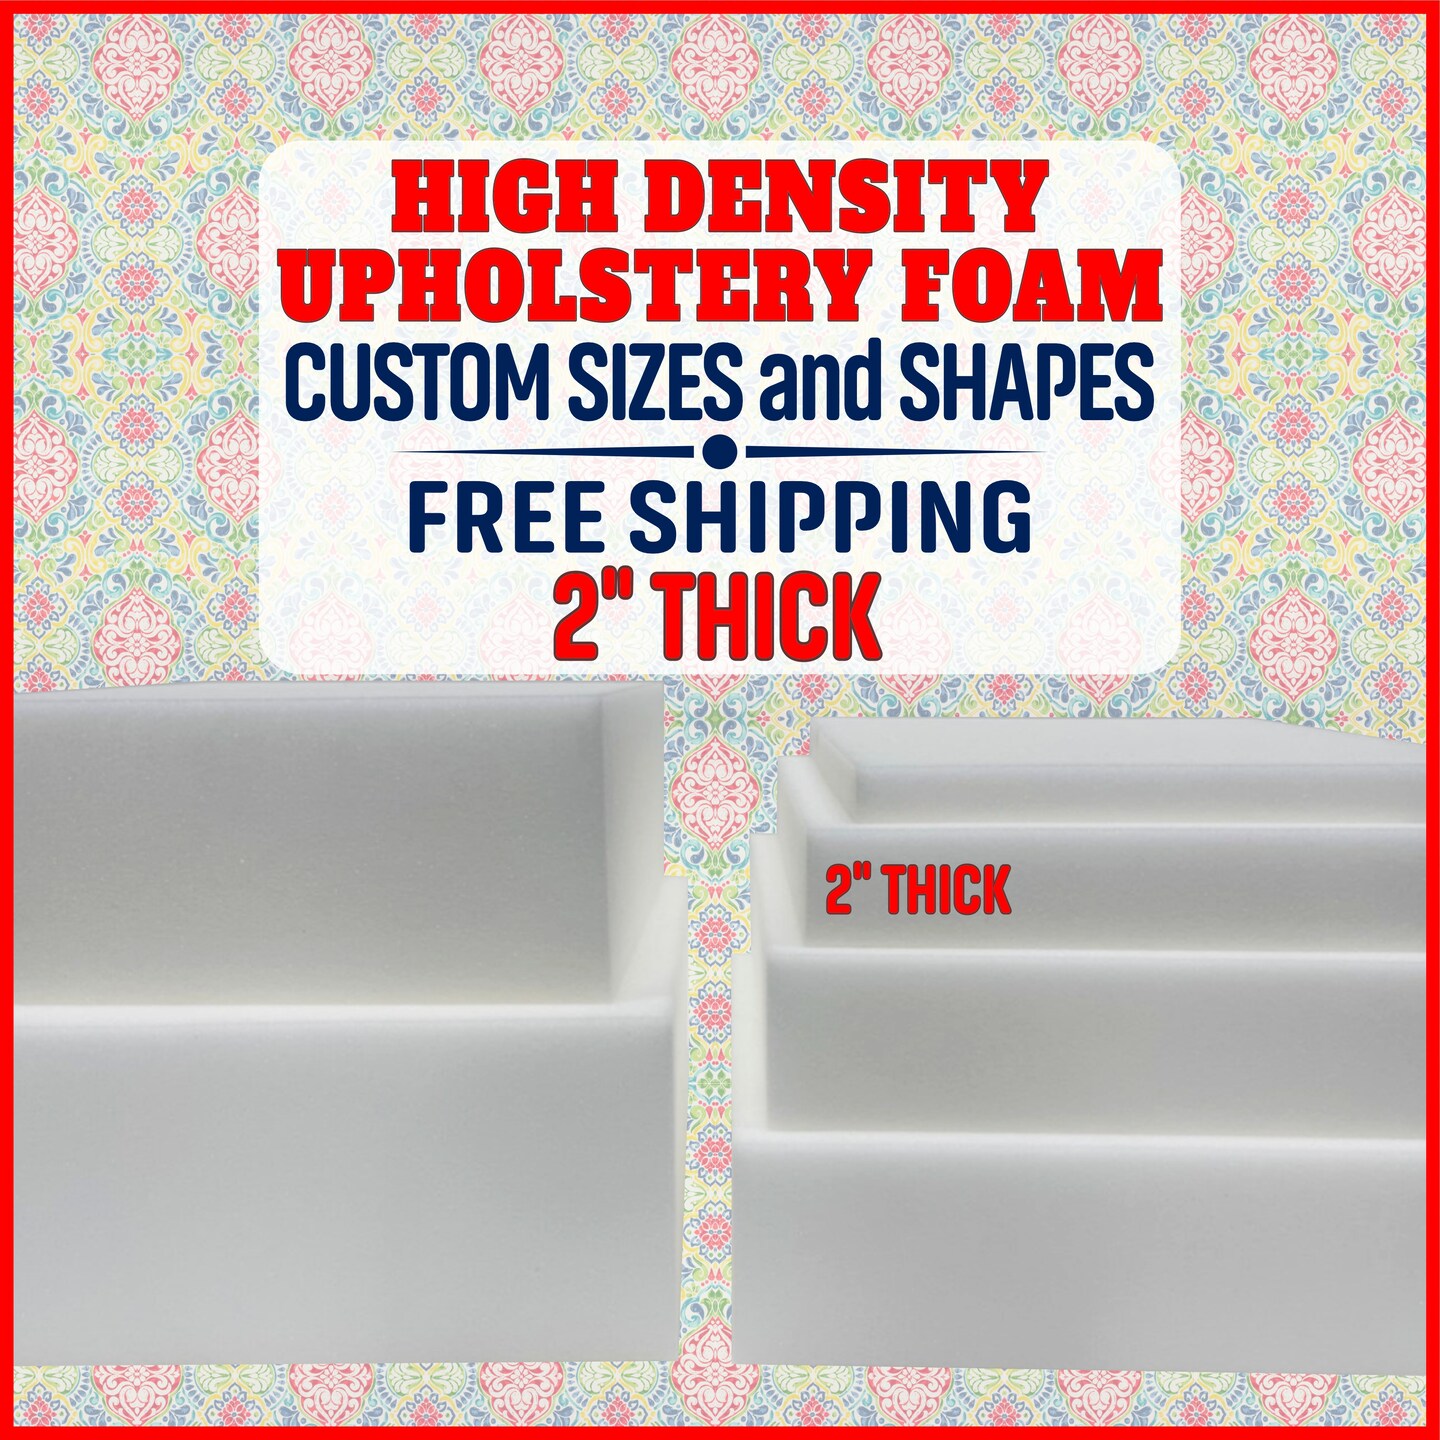 2 thick - High Density Upholstery Foam - Custom Sizes and Shapes